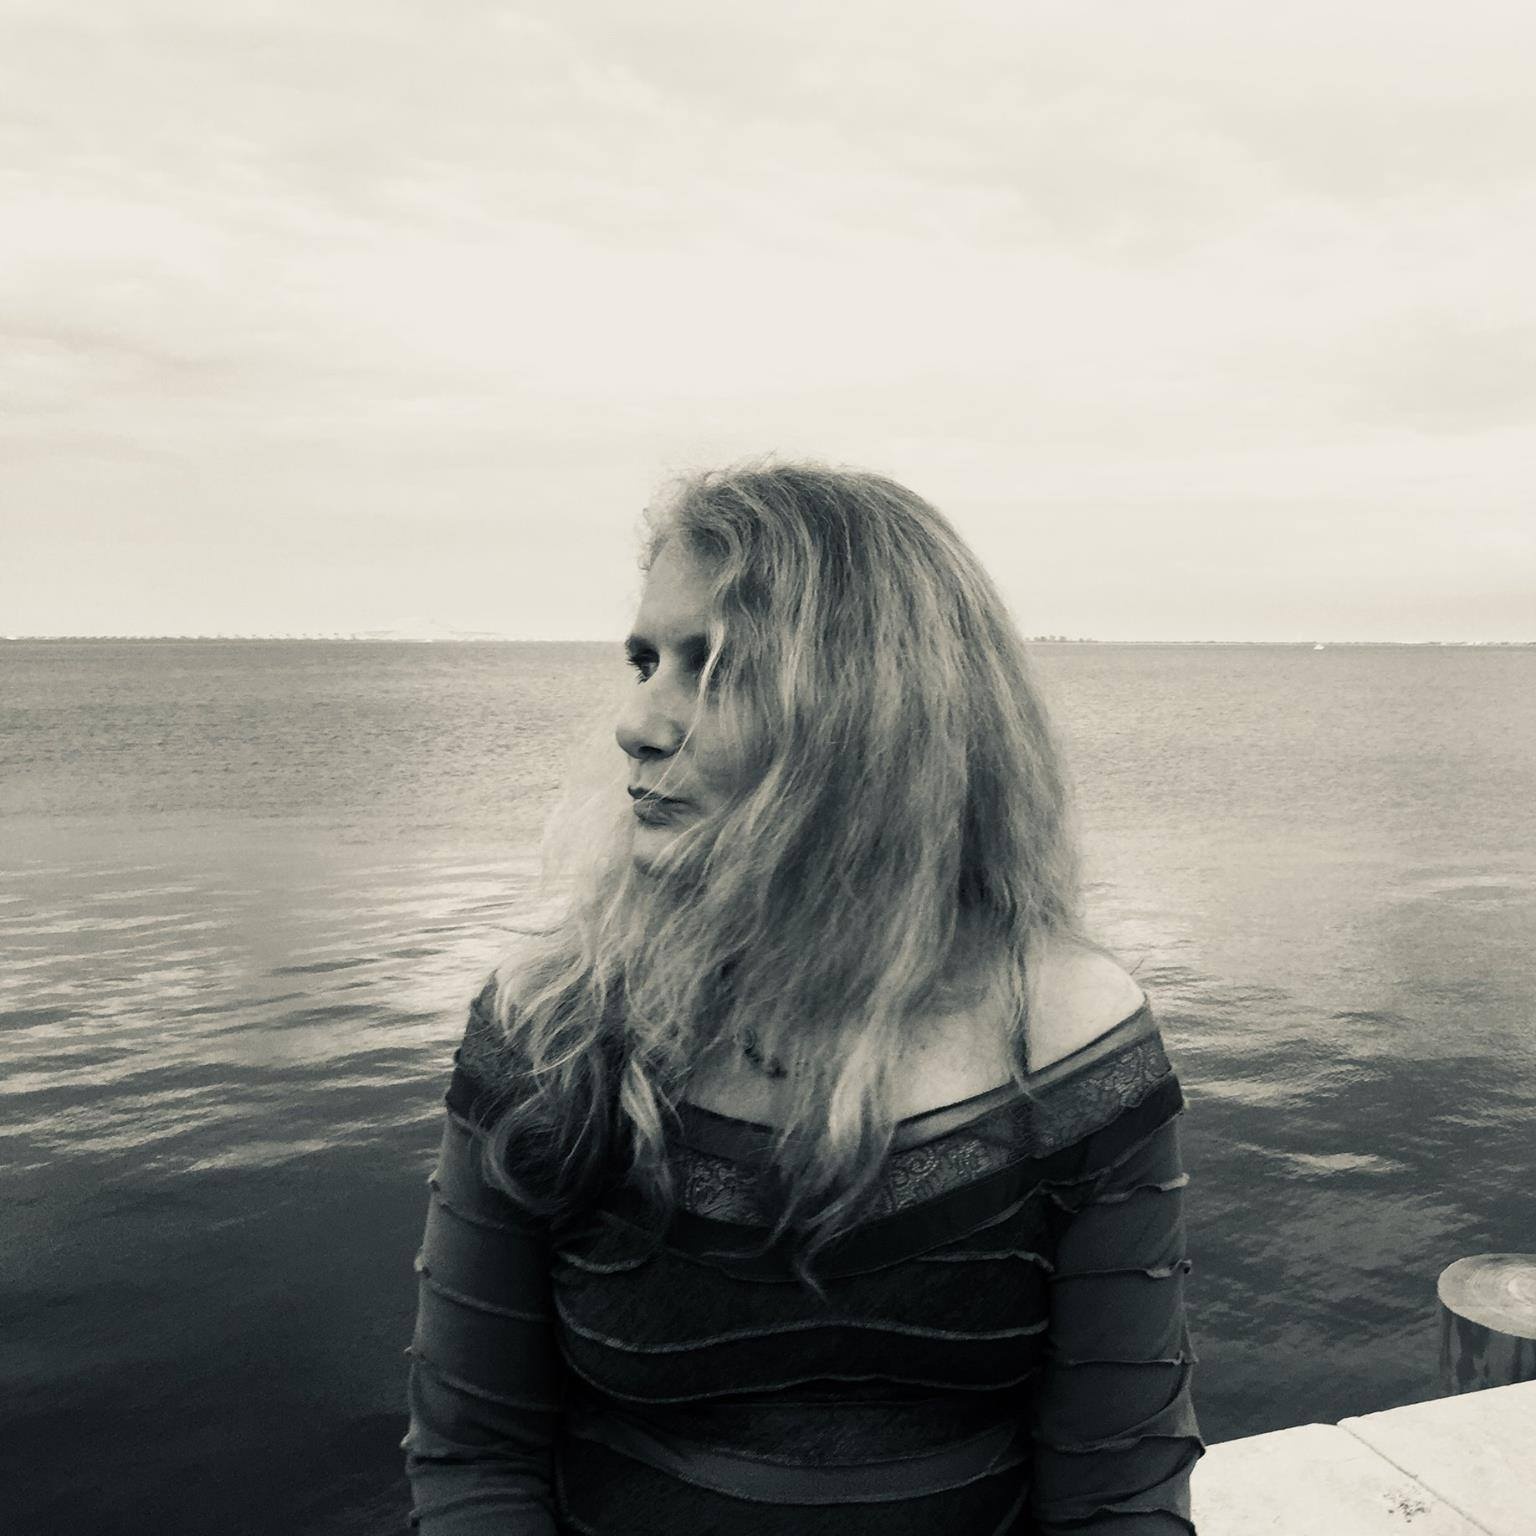 A woman with long dirty blond hair sitting on the edge of a large body of water